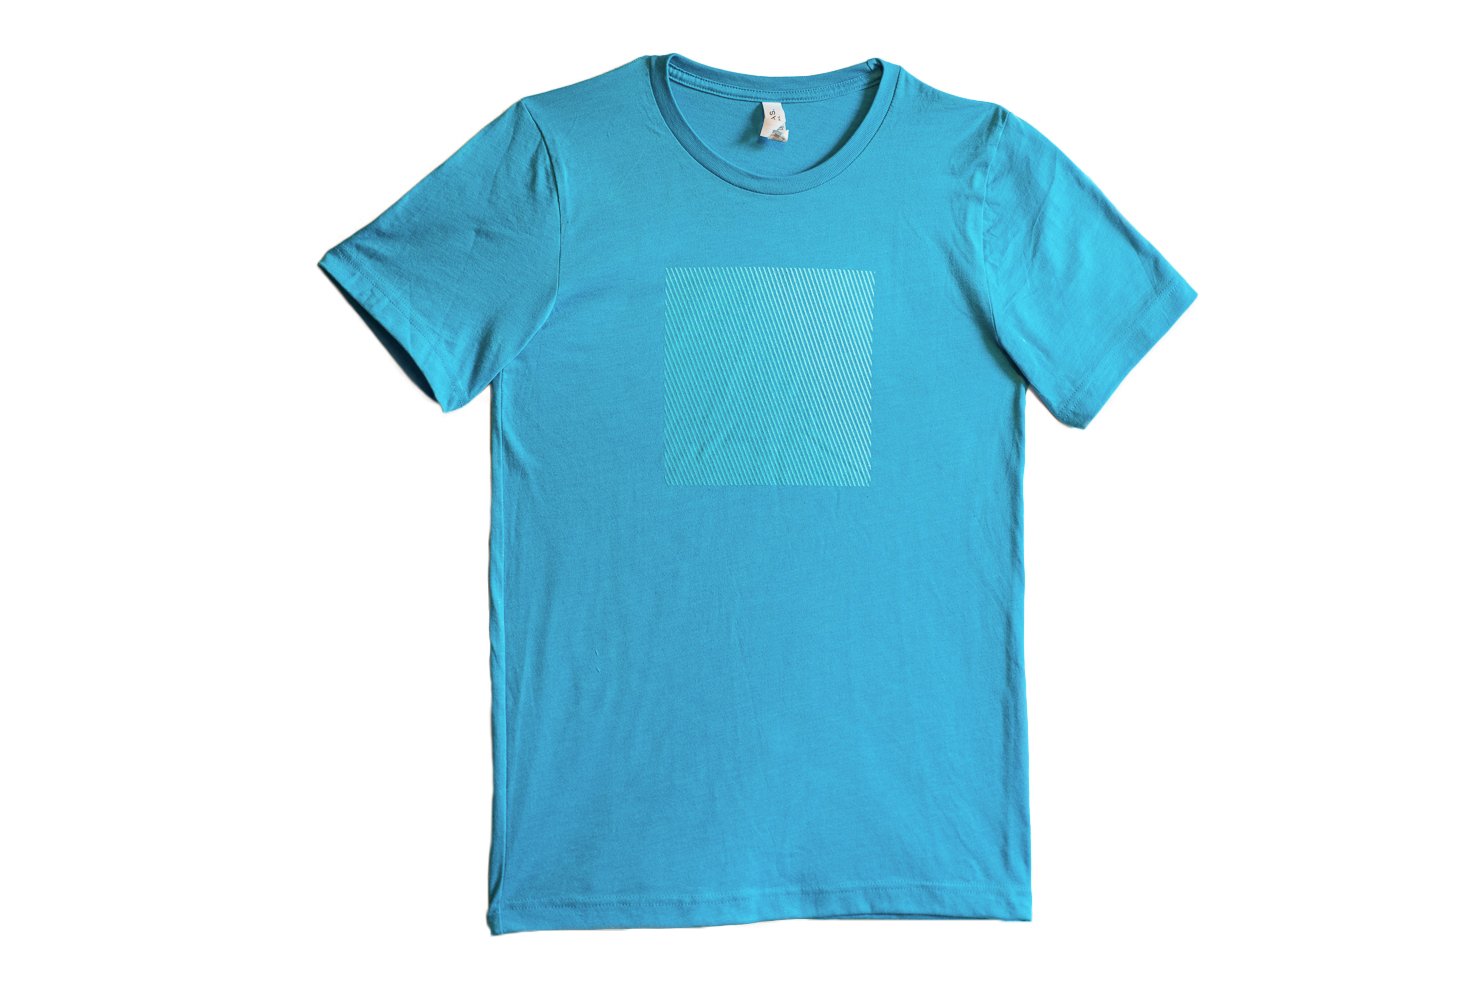 Image of Unisex SPACE T-Shirt in Bright Blue